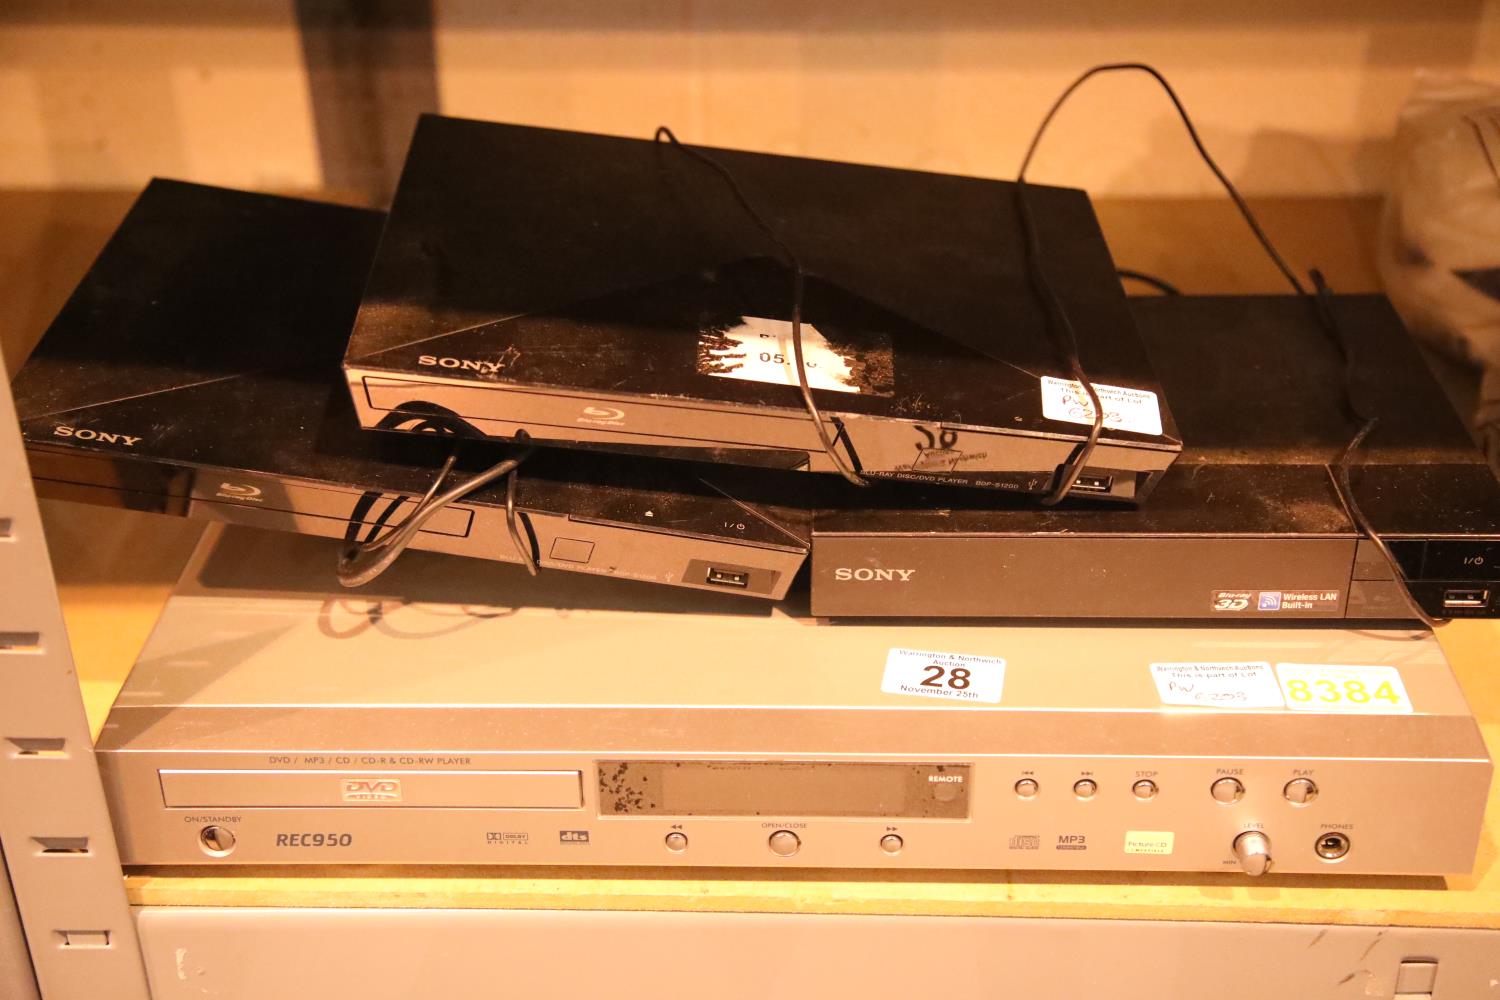 Three Sony Blu Ray and DVD players, and an REC 950 DVD player with remote. Not available for in-